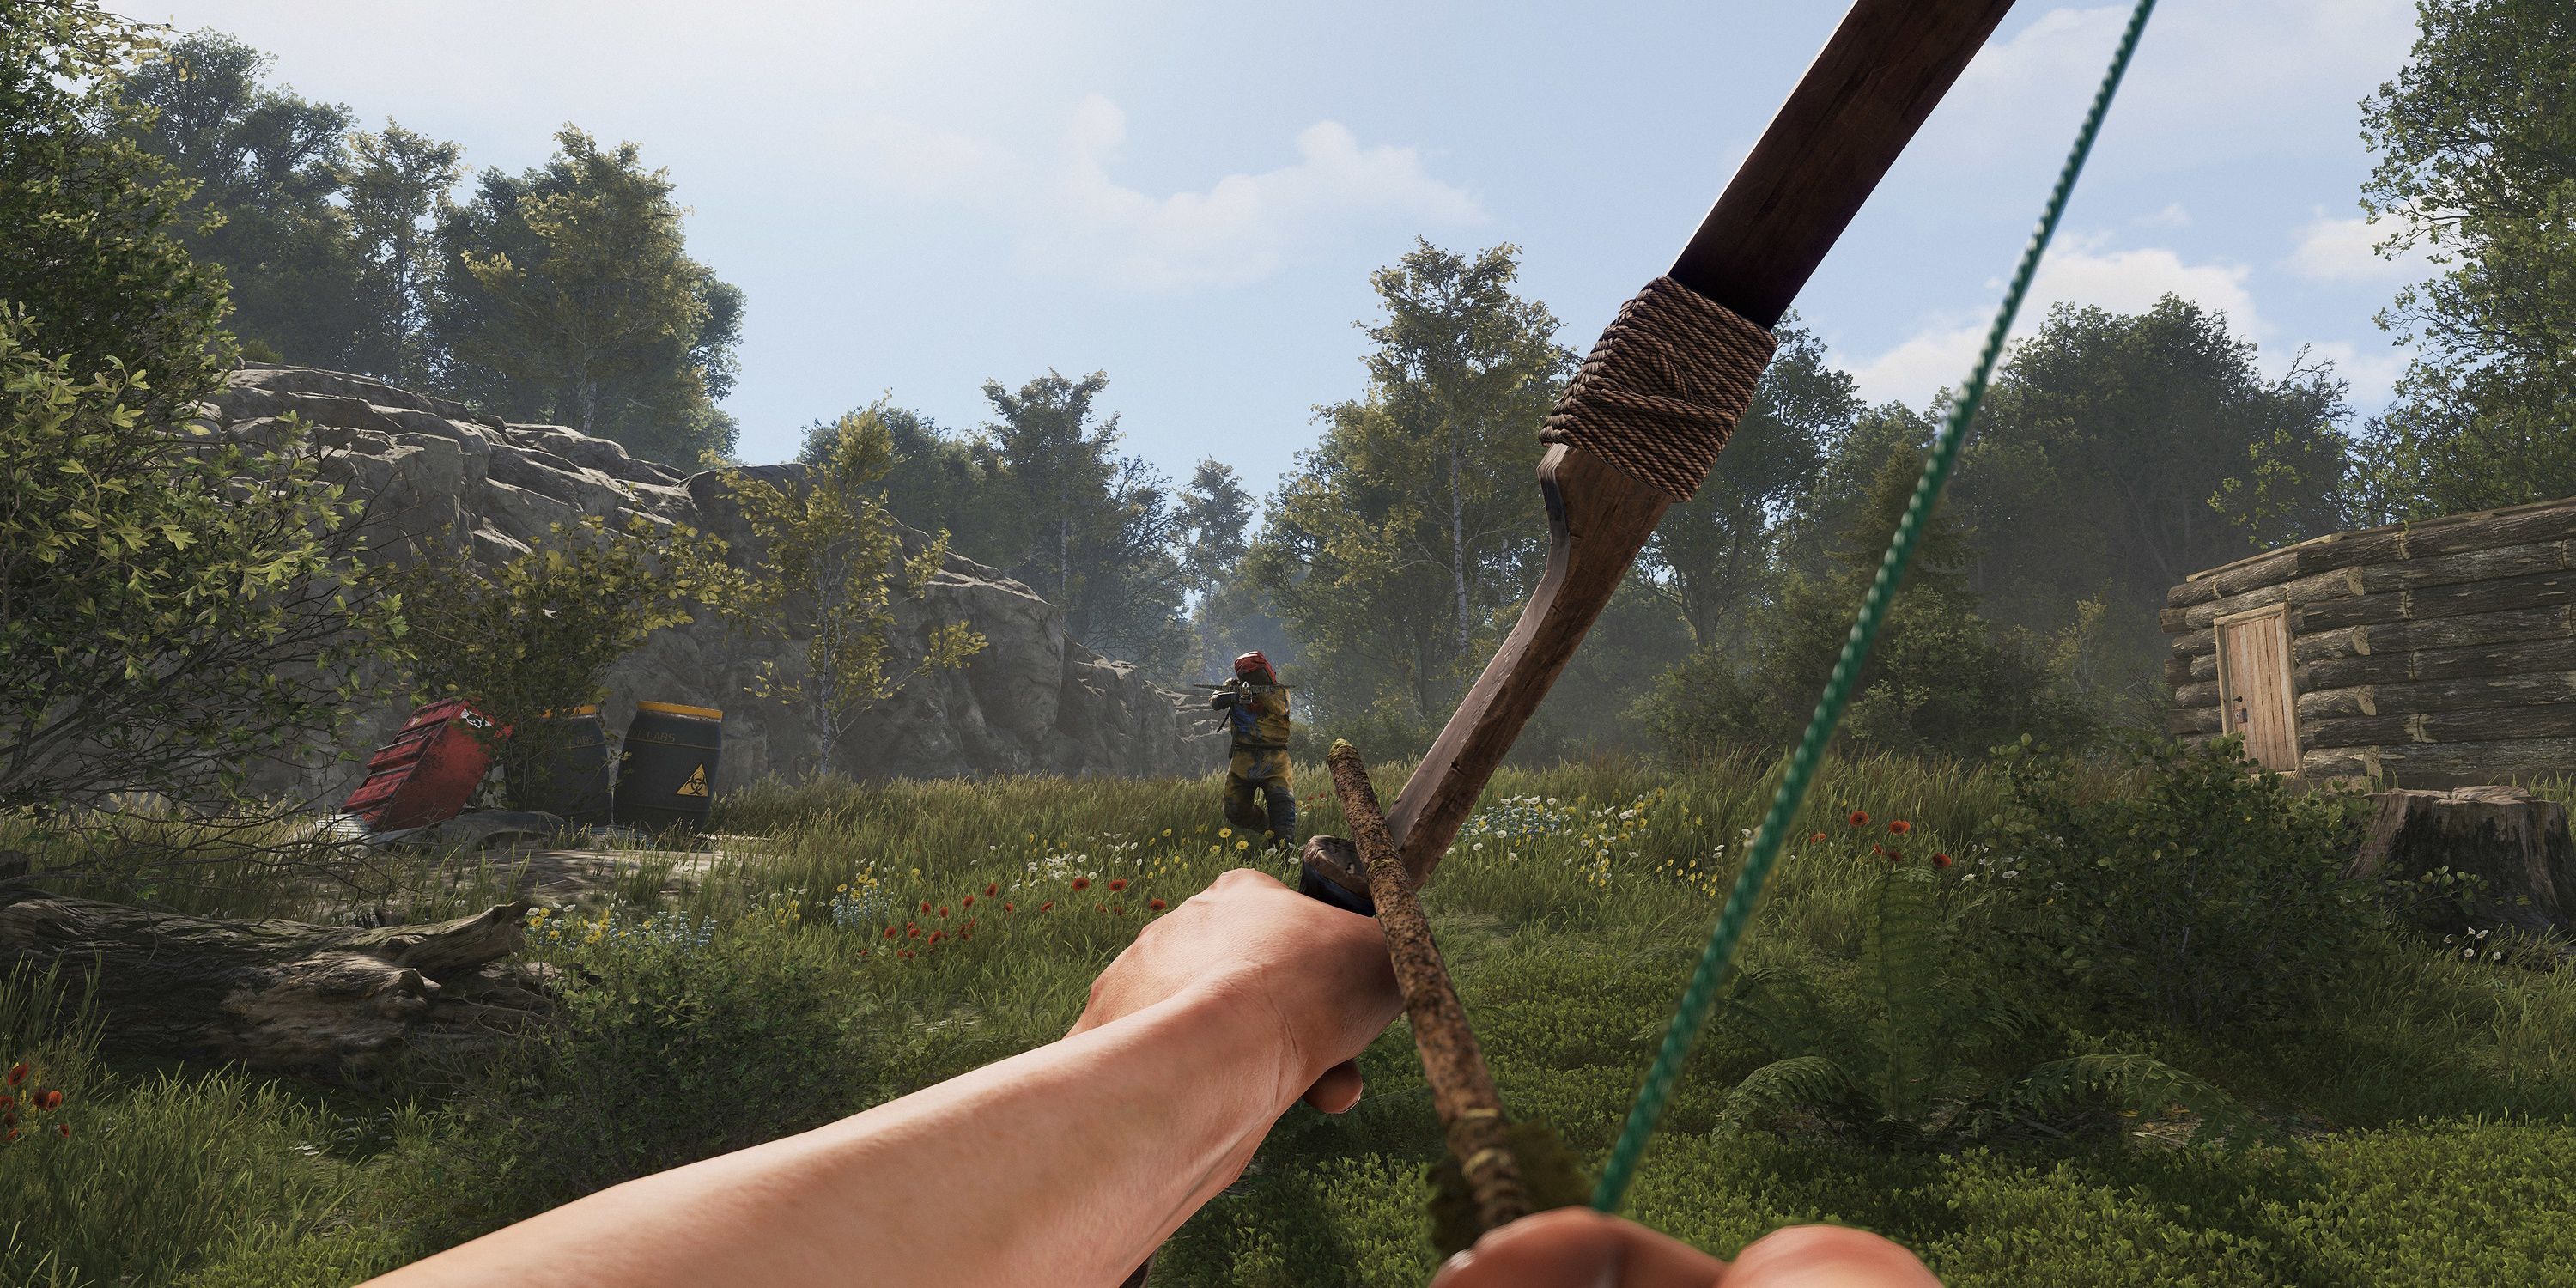 Main character fighting off other player while aiming a bow and arrow in Rust.